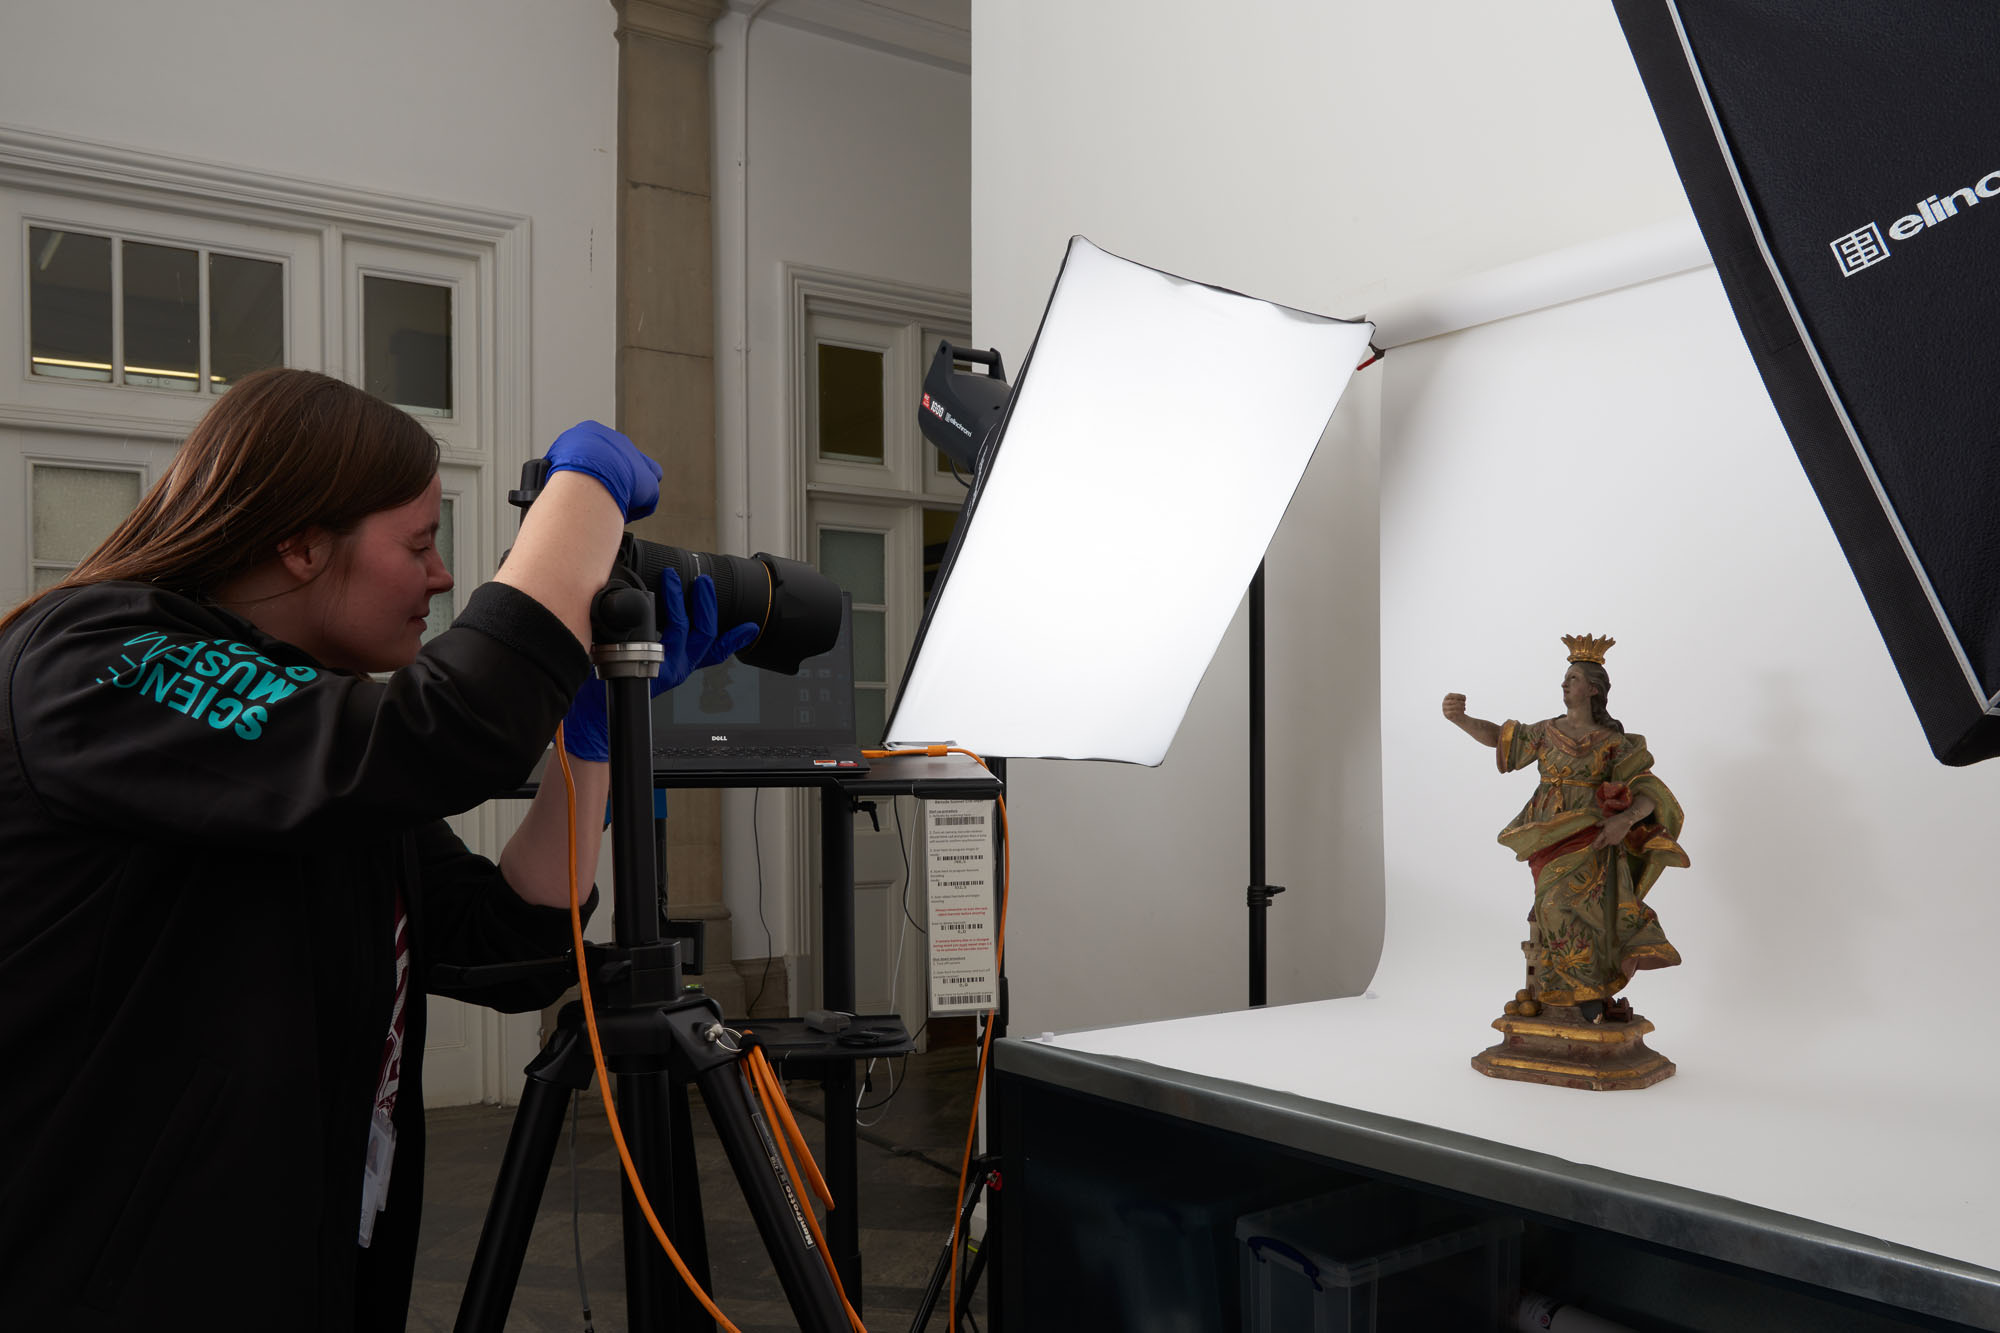 Photographing an item from the collection